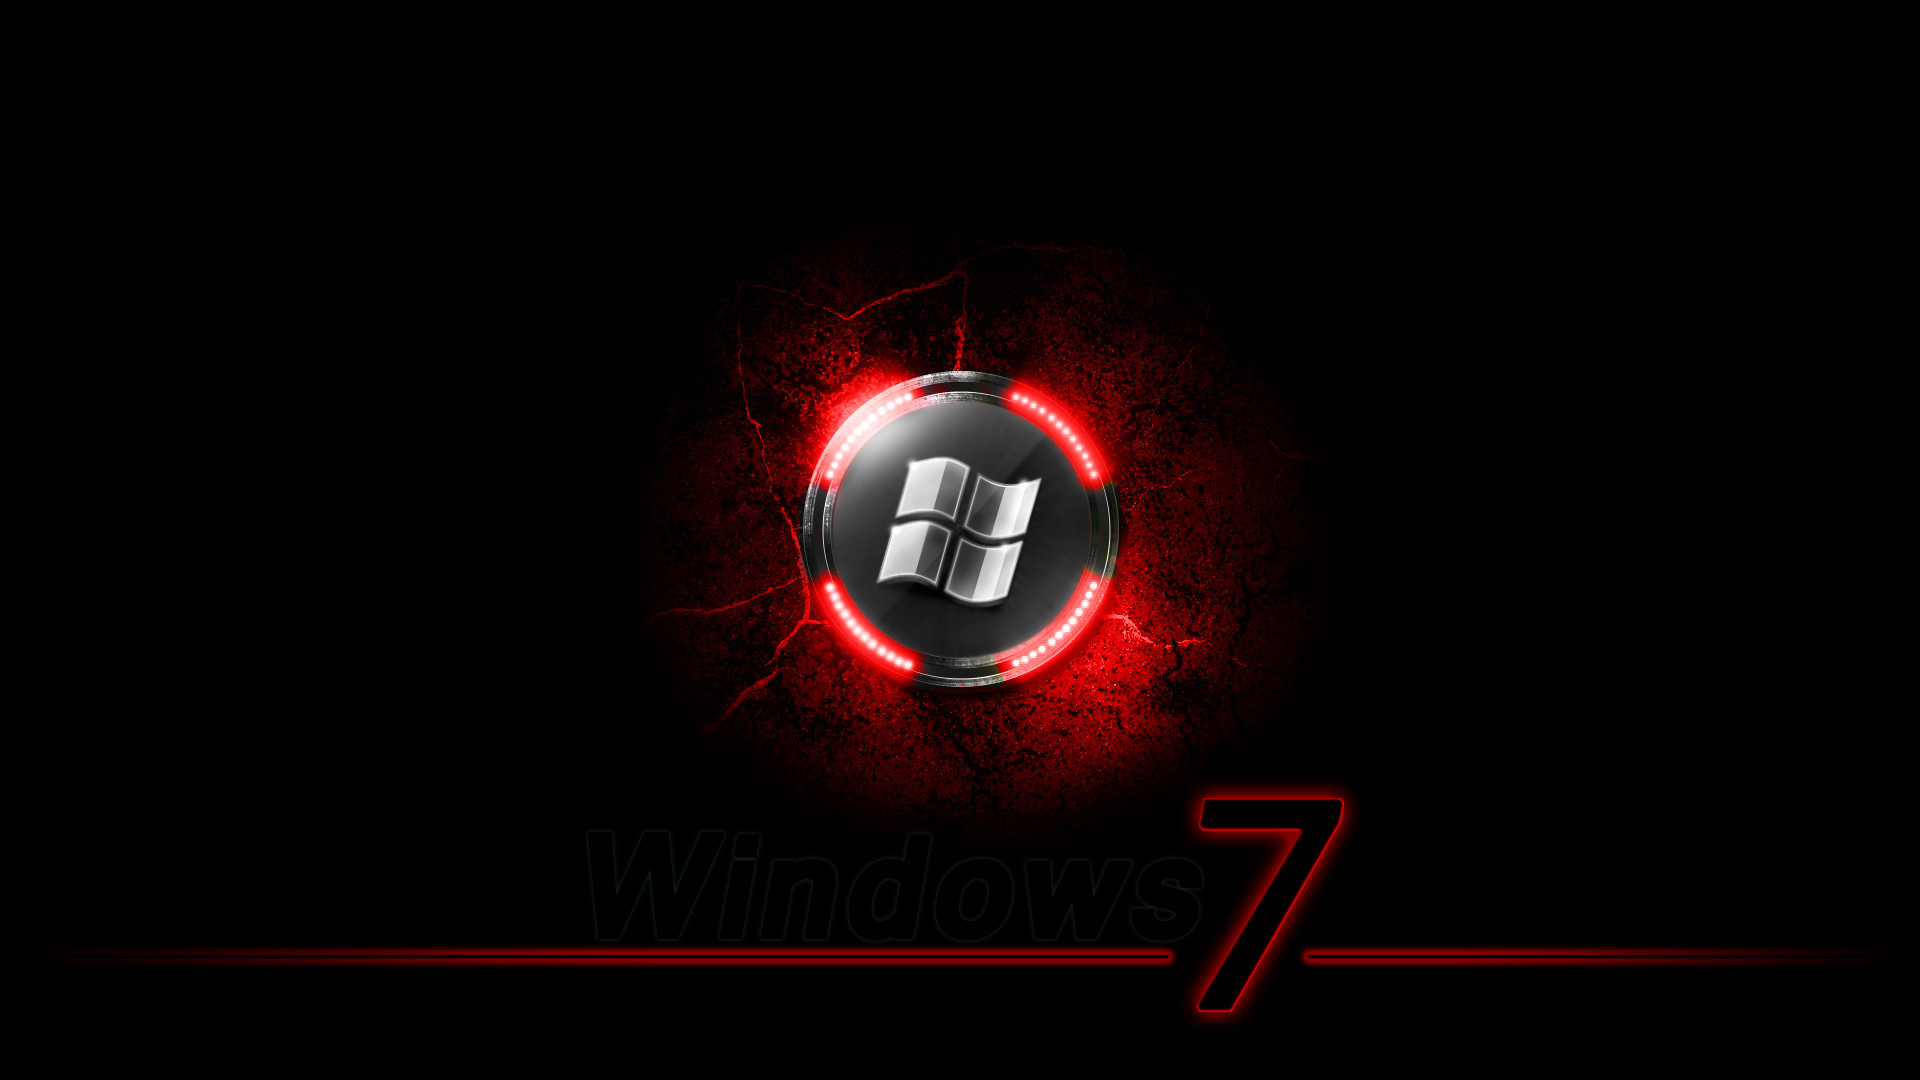 Windows 7 Ultimate Wallpapers HD (61+ images)